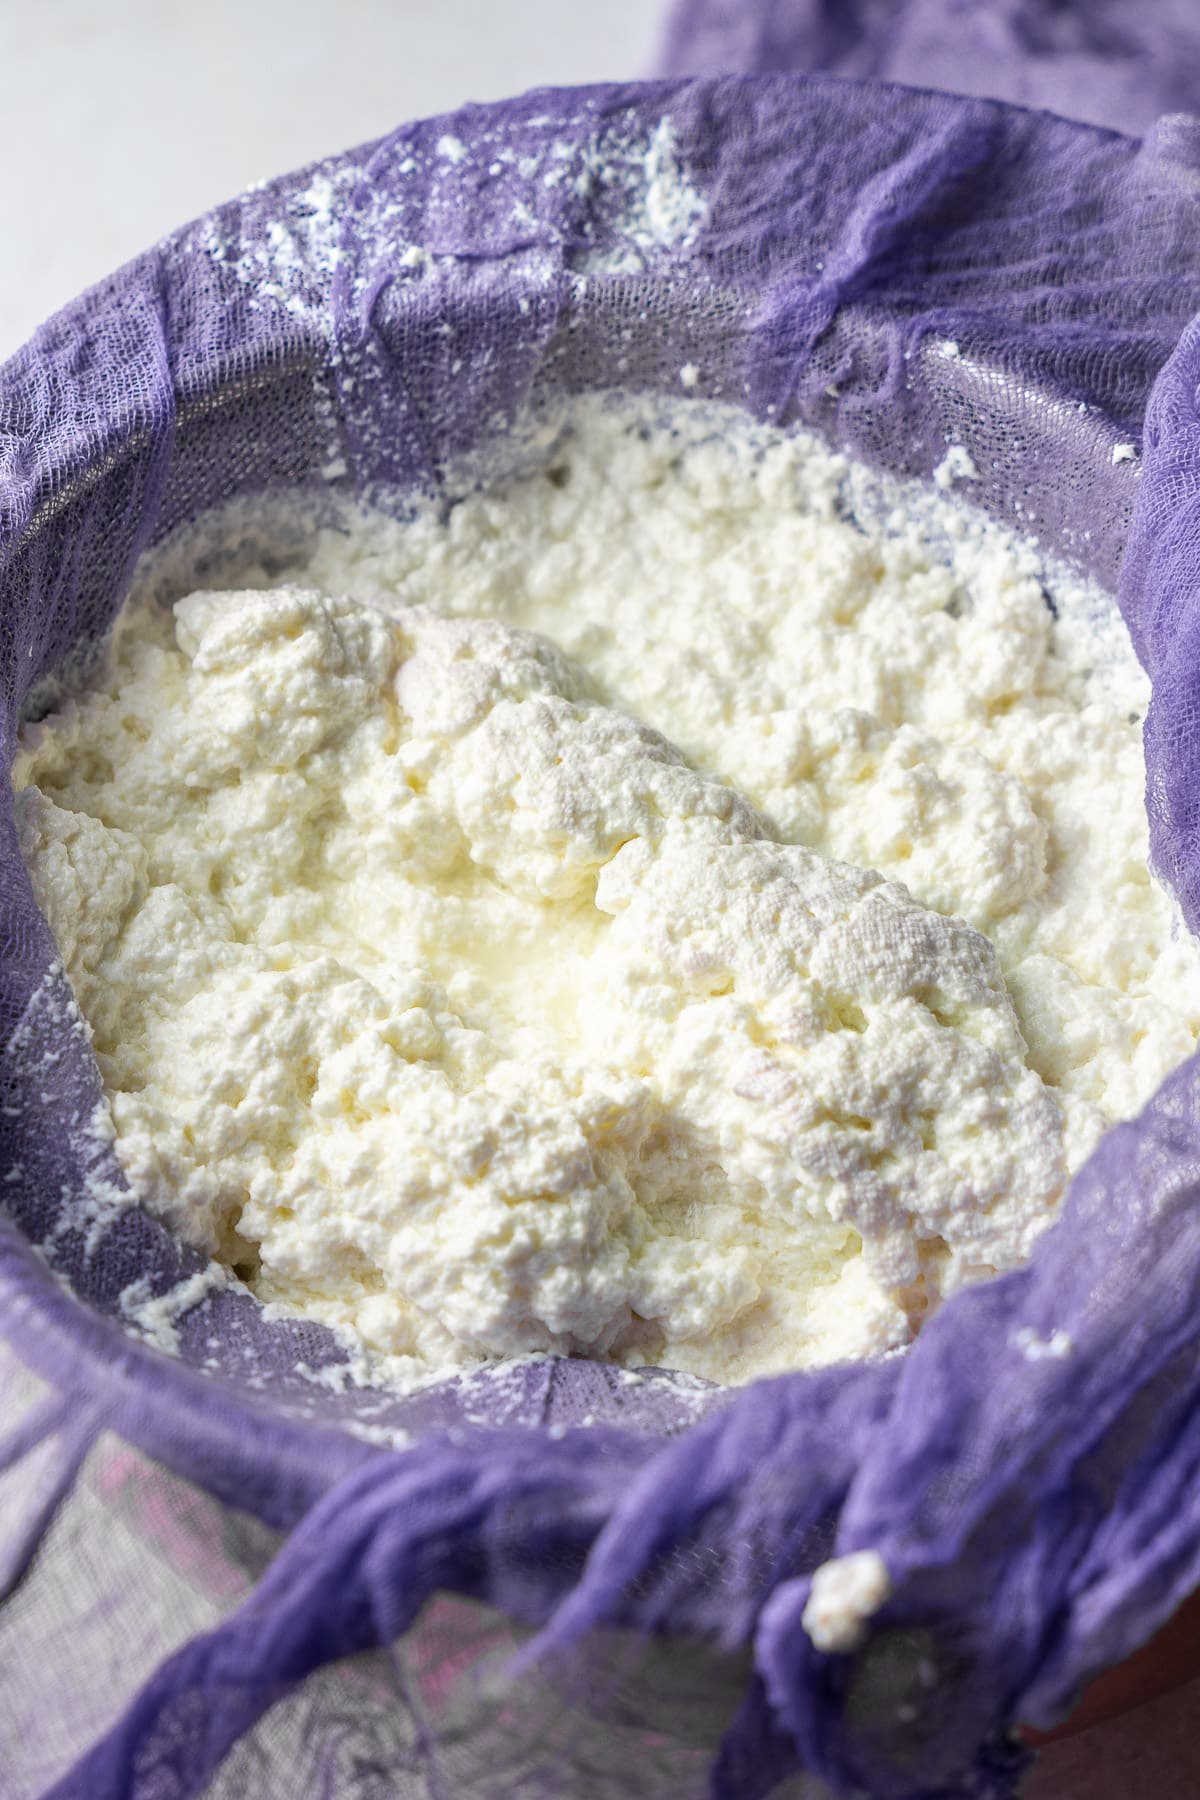 loose milk curds being strained into a bowl over a cheesecloth